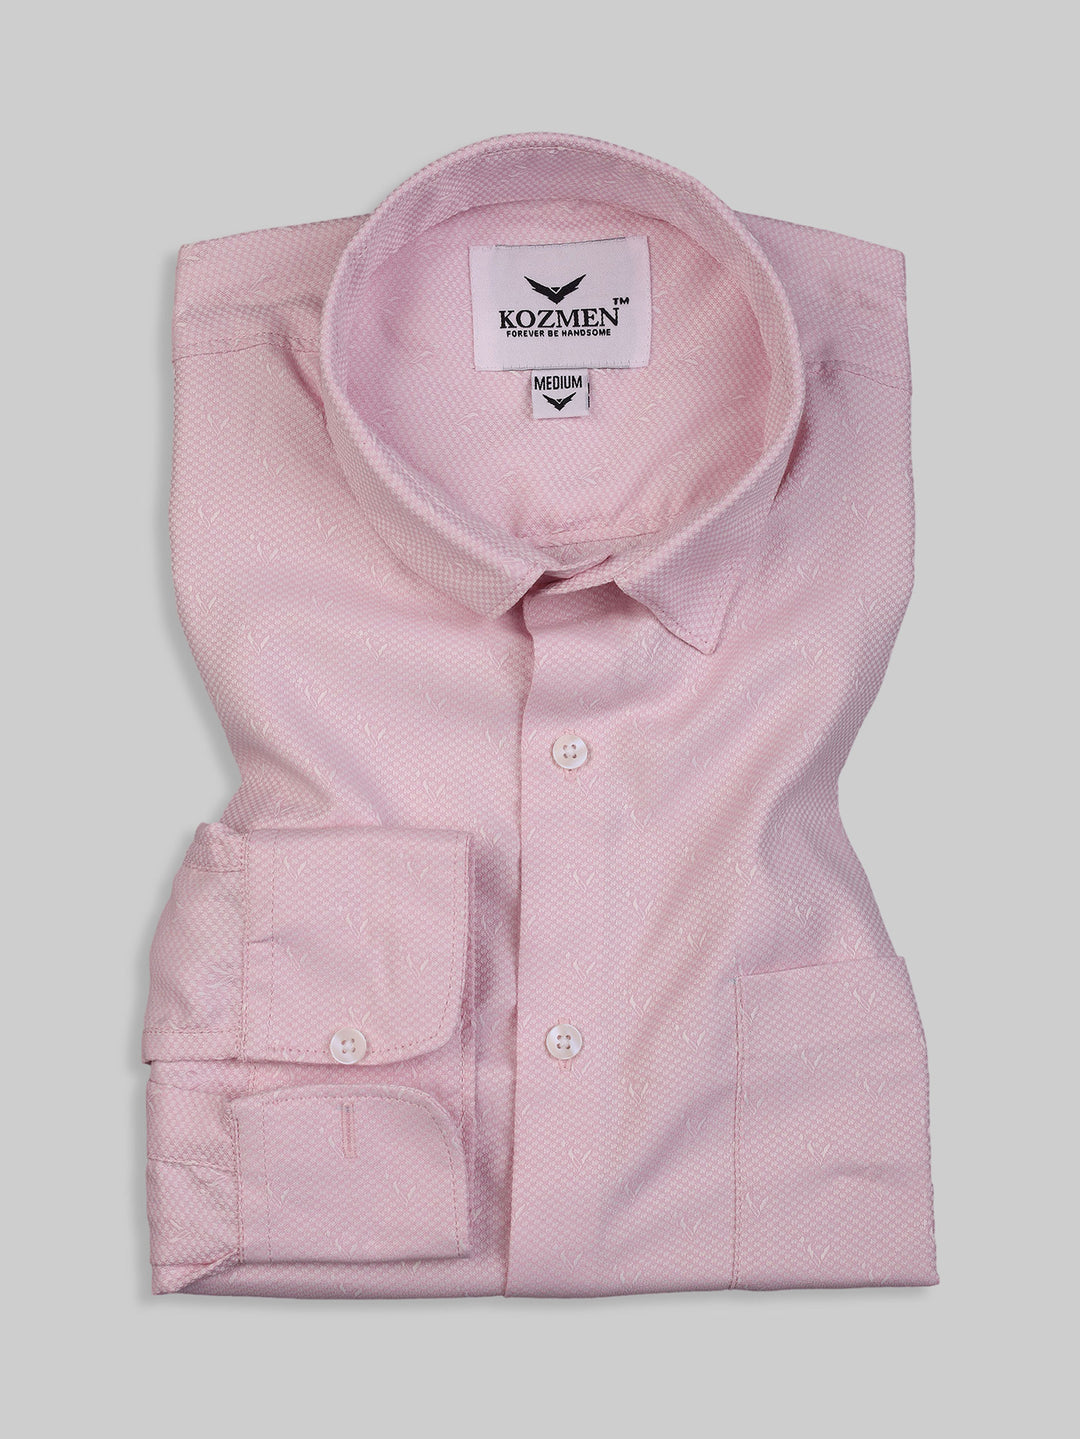 Soft Pink Cotton Casual with Micro Leaf Print Shirt